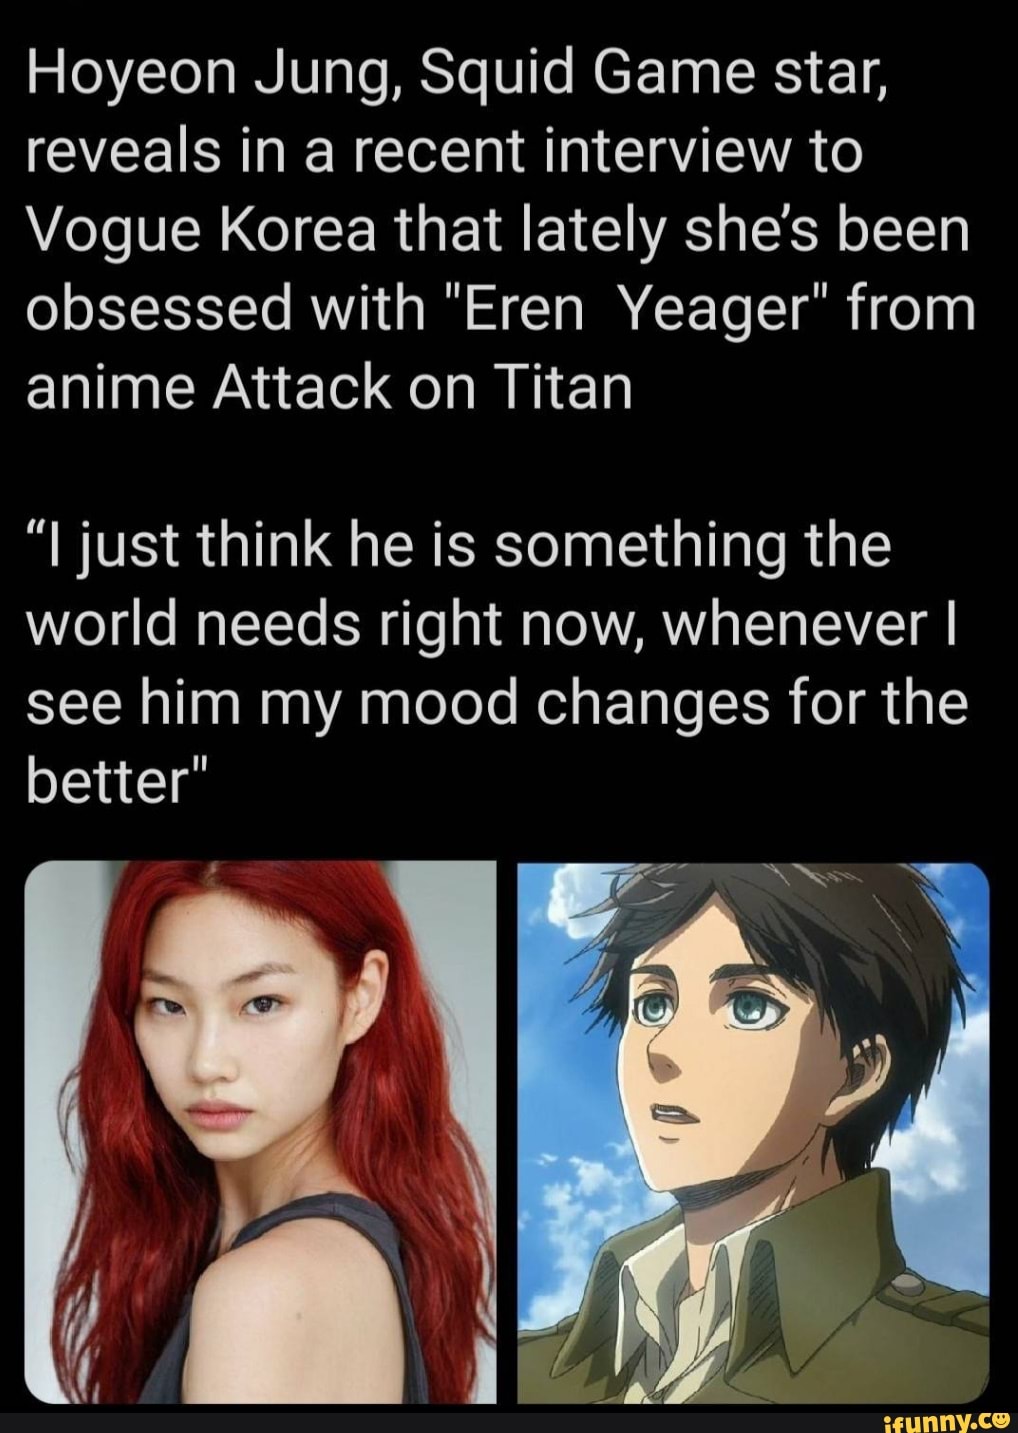 Attack on Titan on X: Hoyeon Jung, Squid Game star, reveals in a recent  interview to Vogue Korea that lately she's been obsessed with Mikasa  Ackerman. “I just think she's someone the